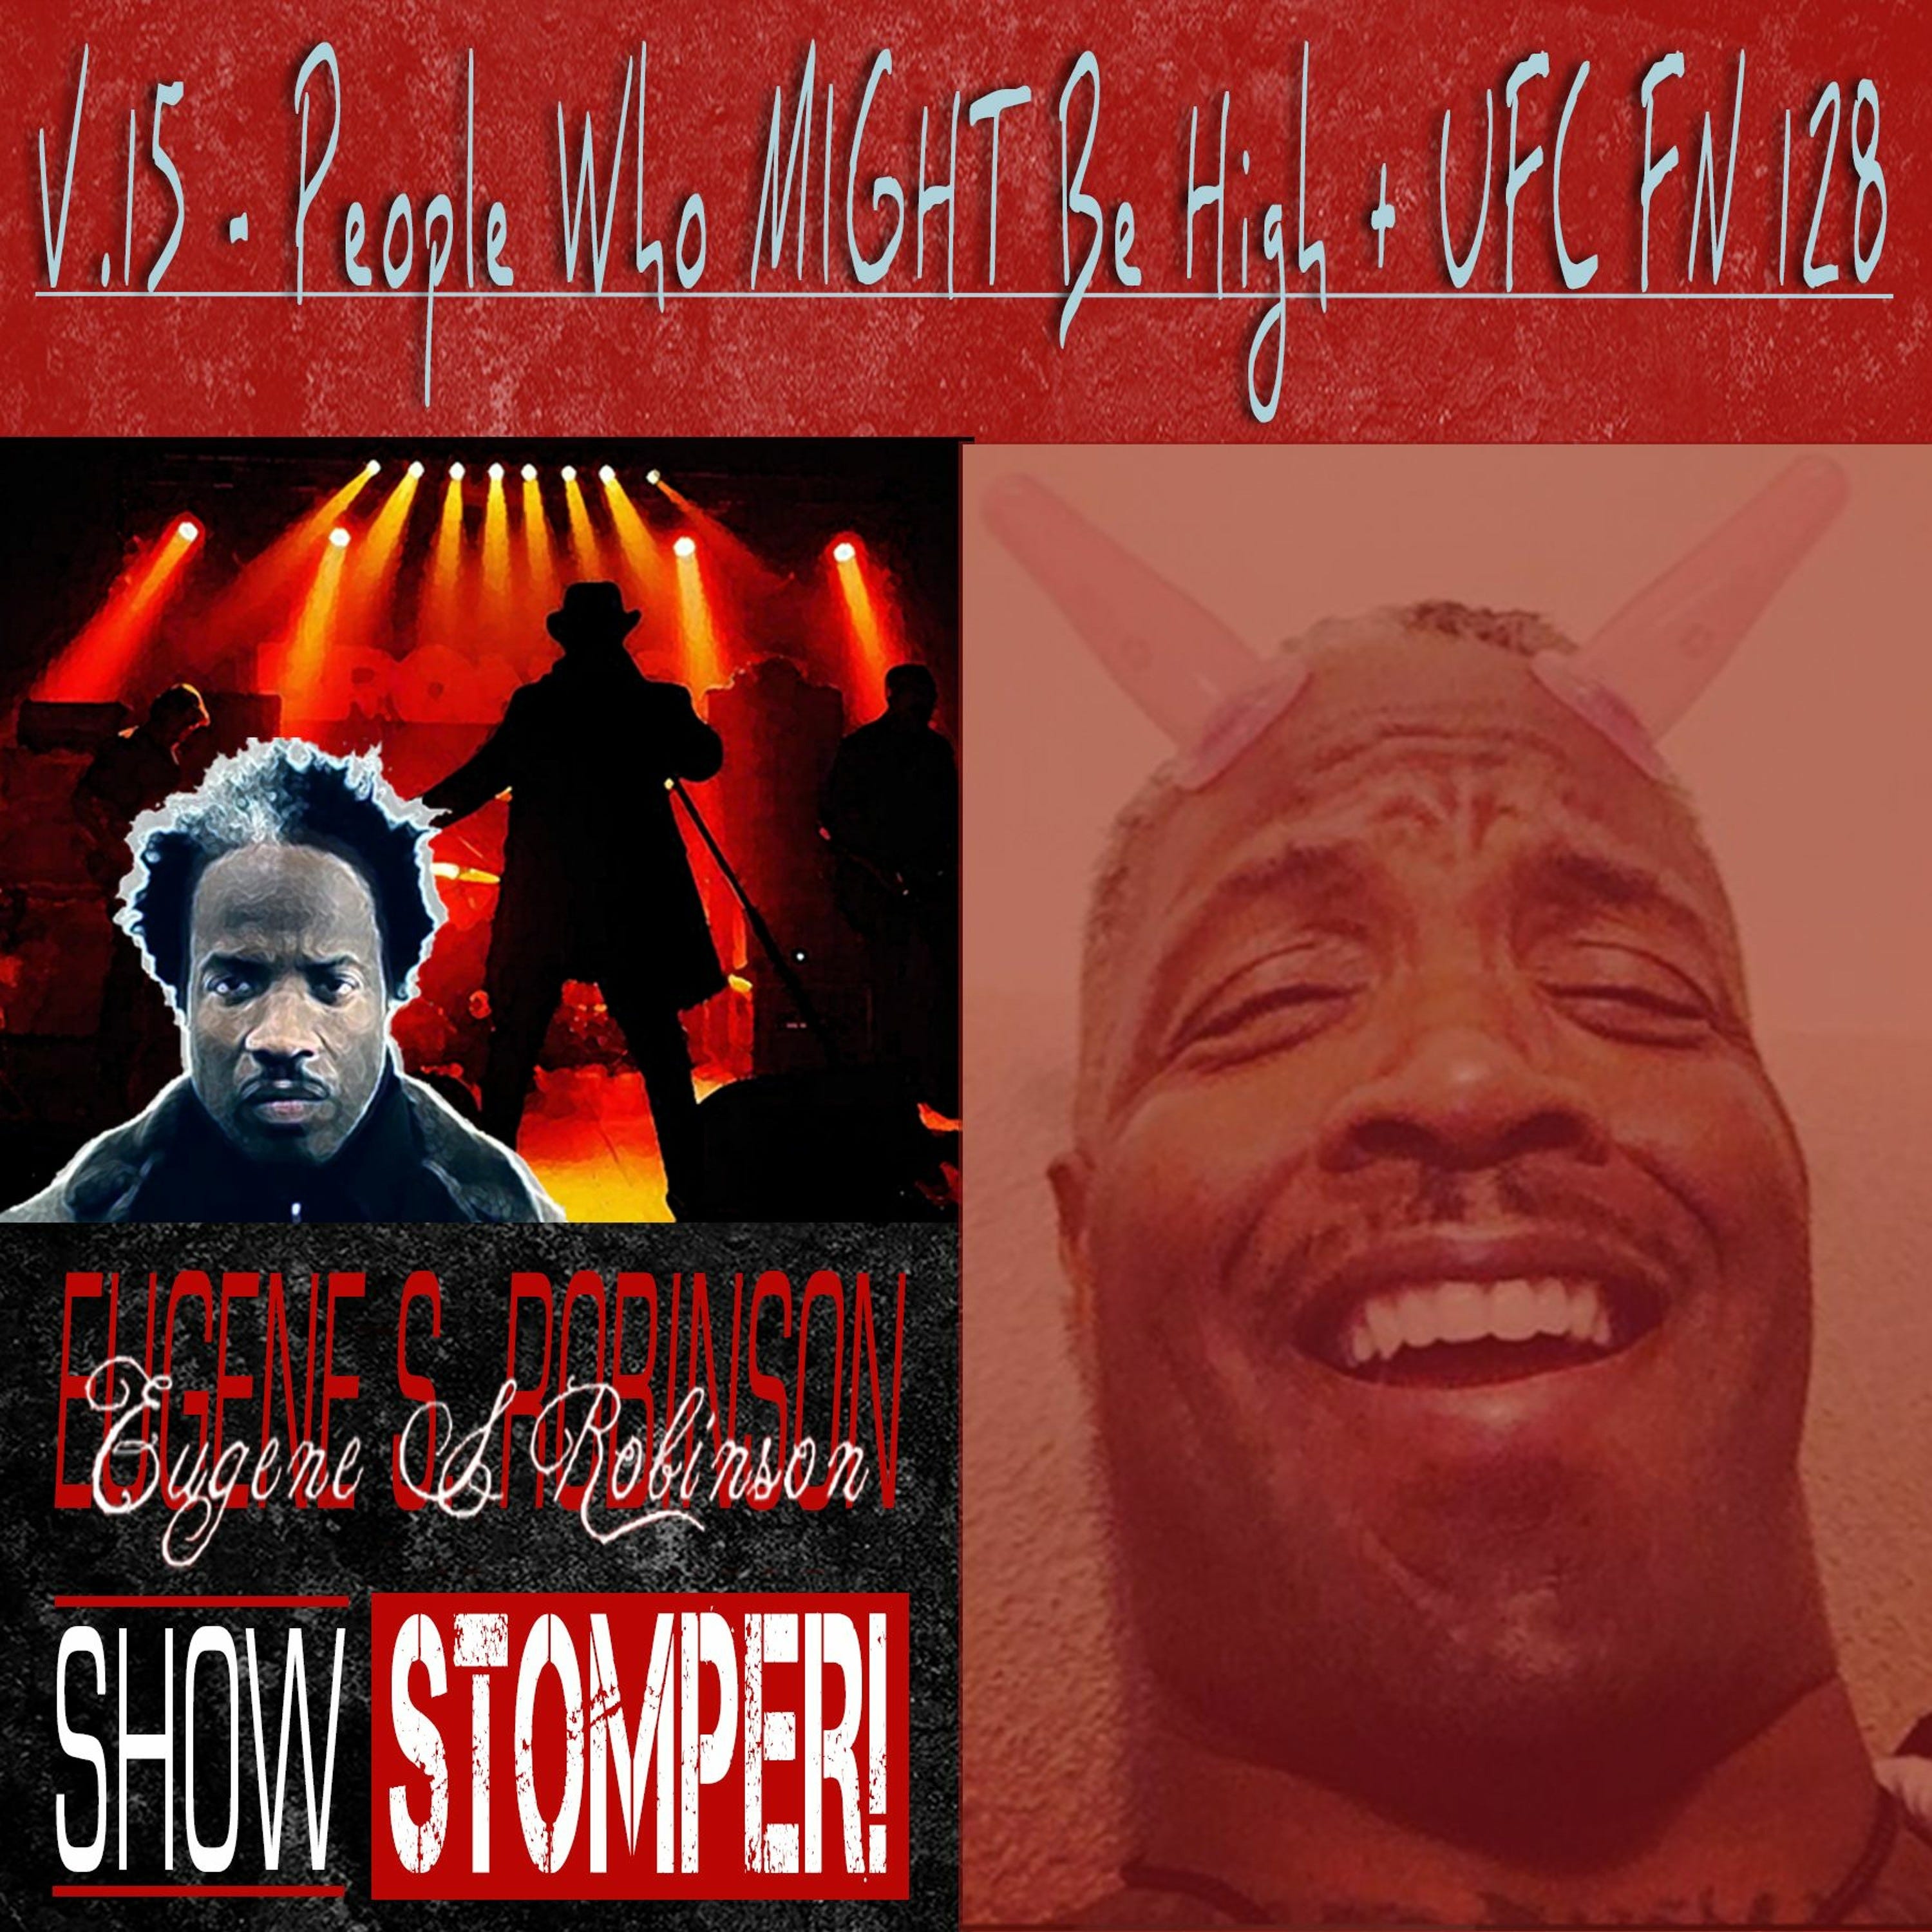 The Eugene S. Robinson Show Stomper! V.15 - People Who MIGHT Be High + UFC FN 128